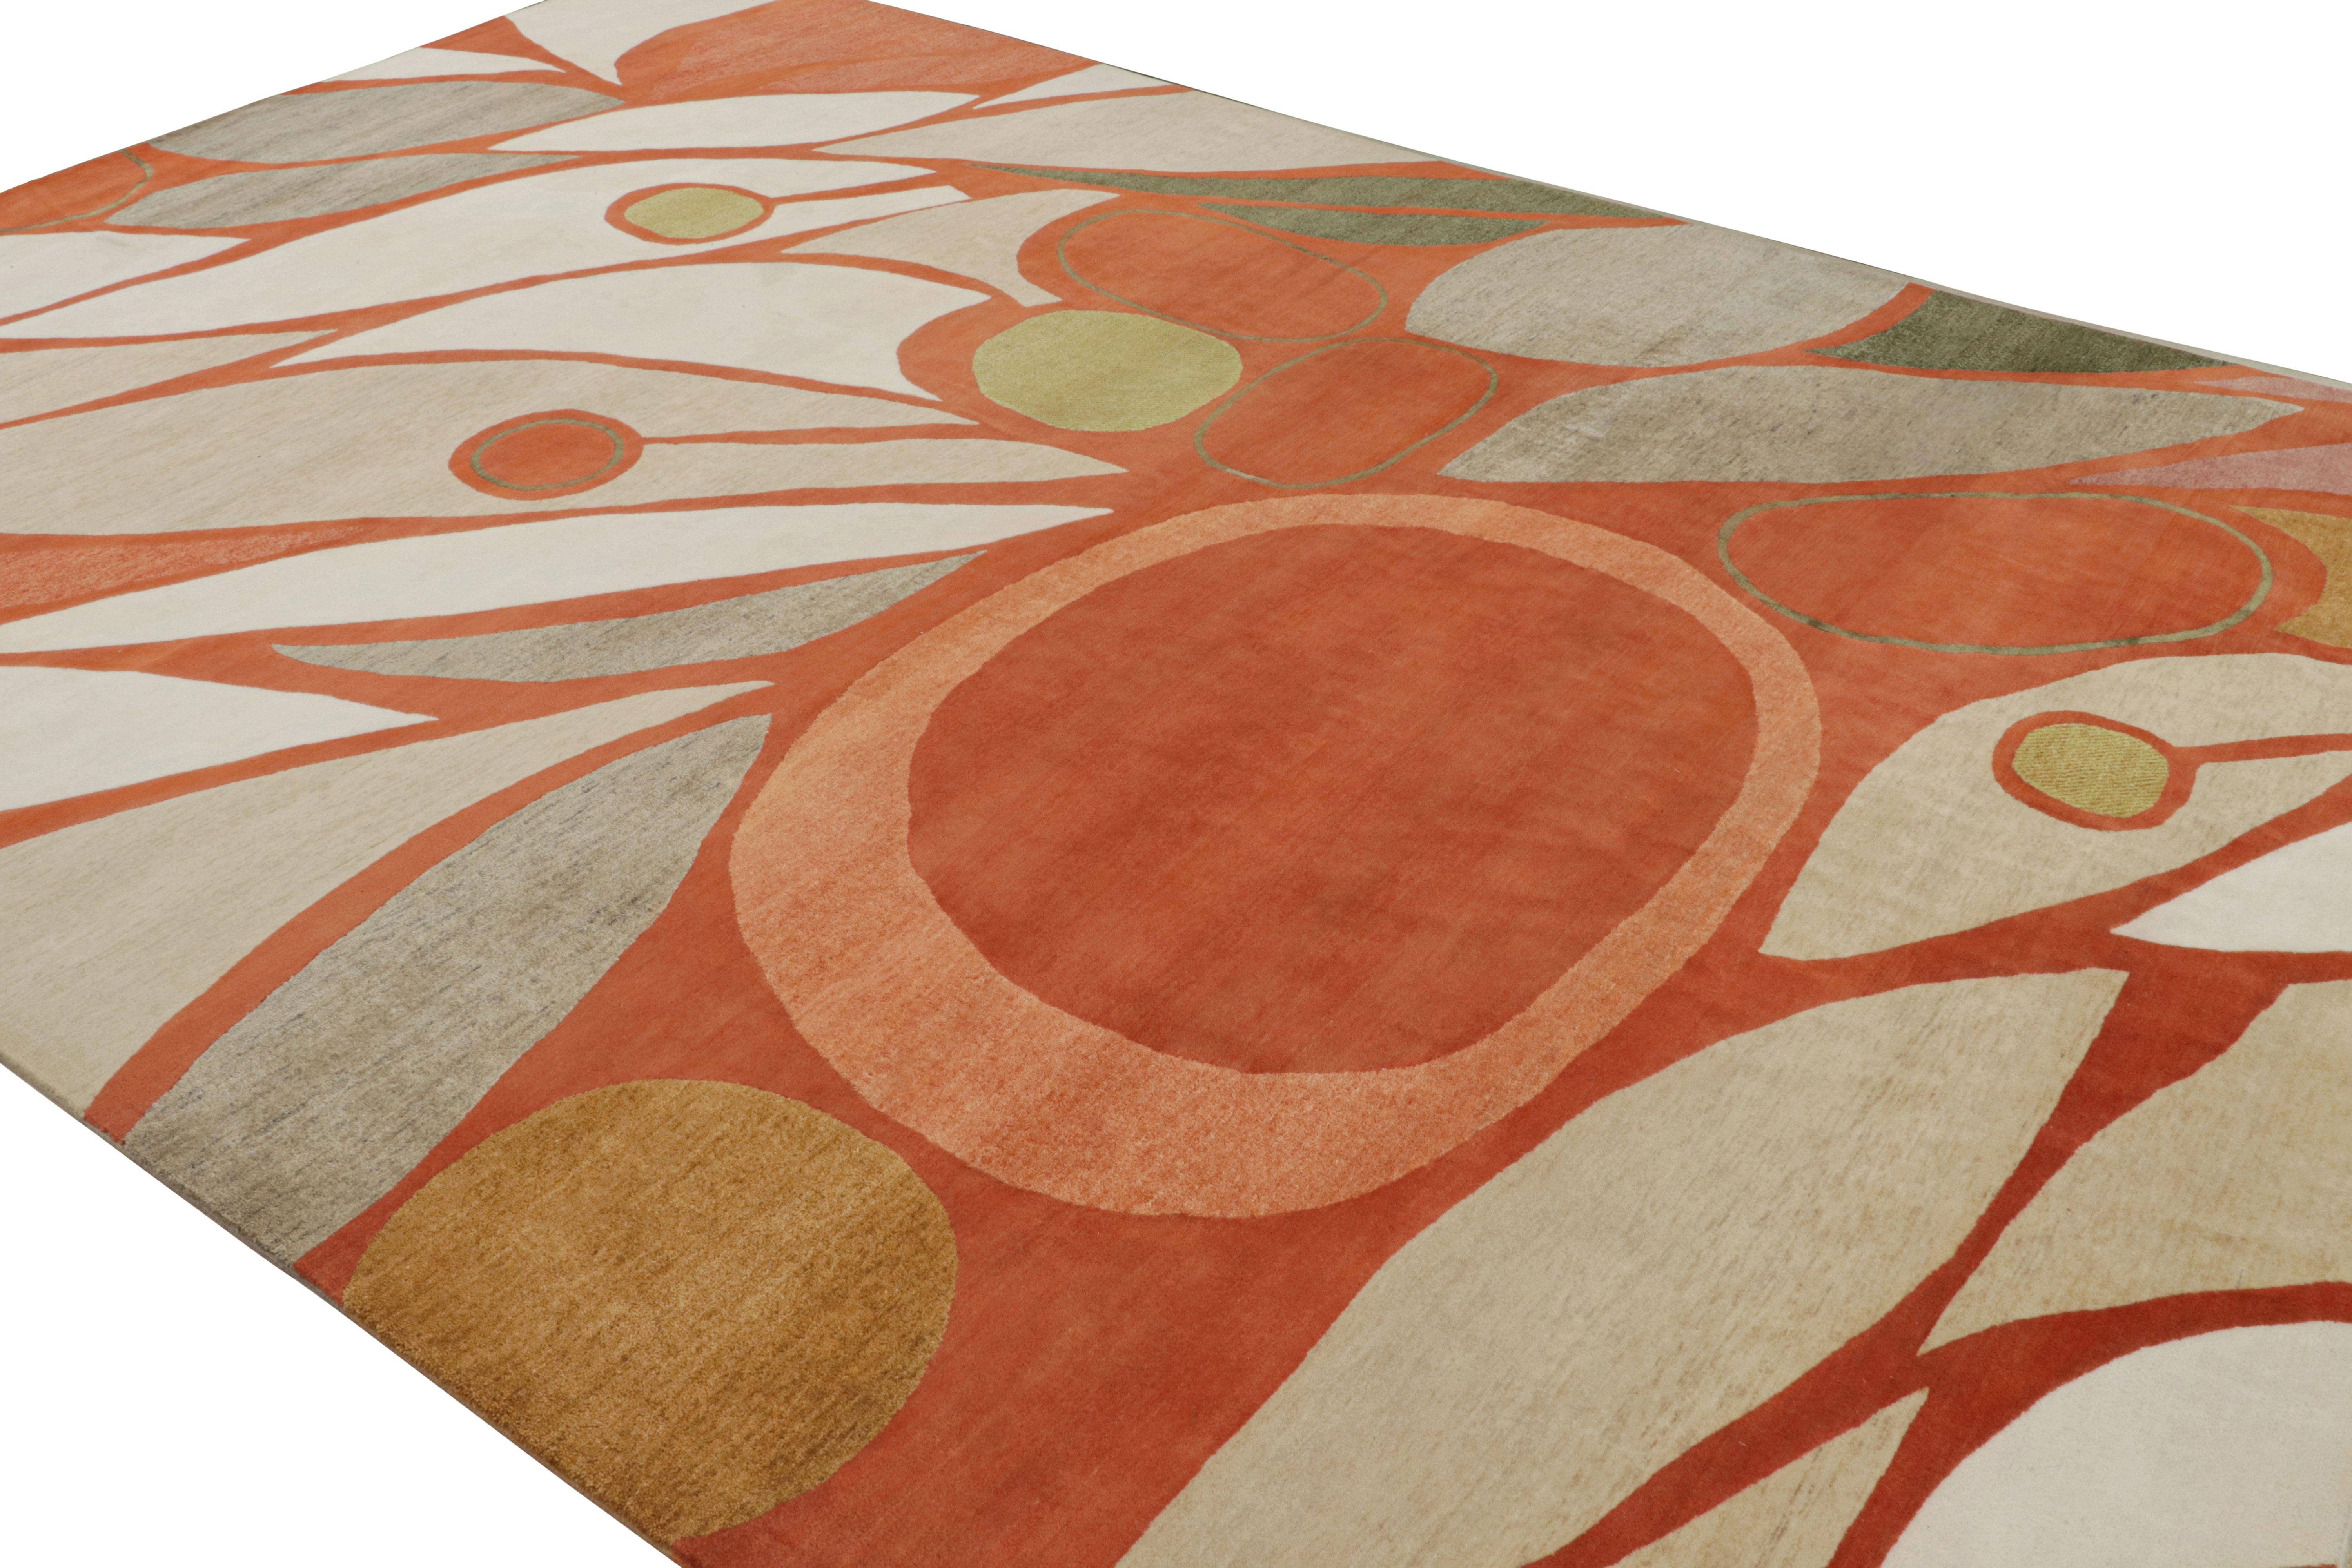 This 10x14 rug is from Rug & Kilim’s Mid-Century Modern collection in collaboration with Jenn Ski - handknotted in wool and silk

On the Design:

Keen eyes will observe blood orange underscoring a series of vibrant, finely drawn geometric patterns